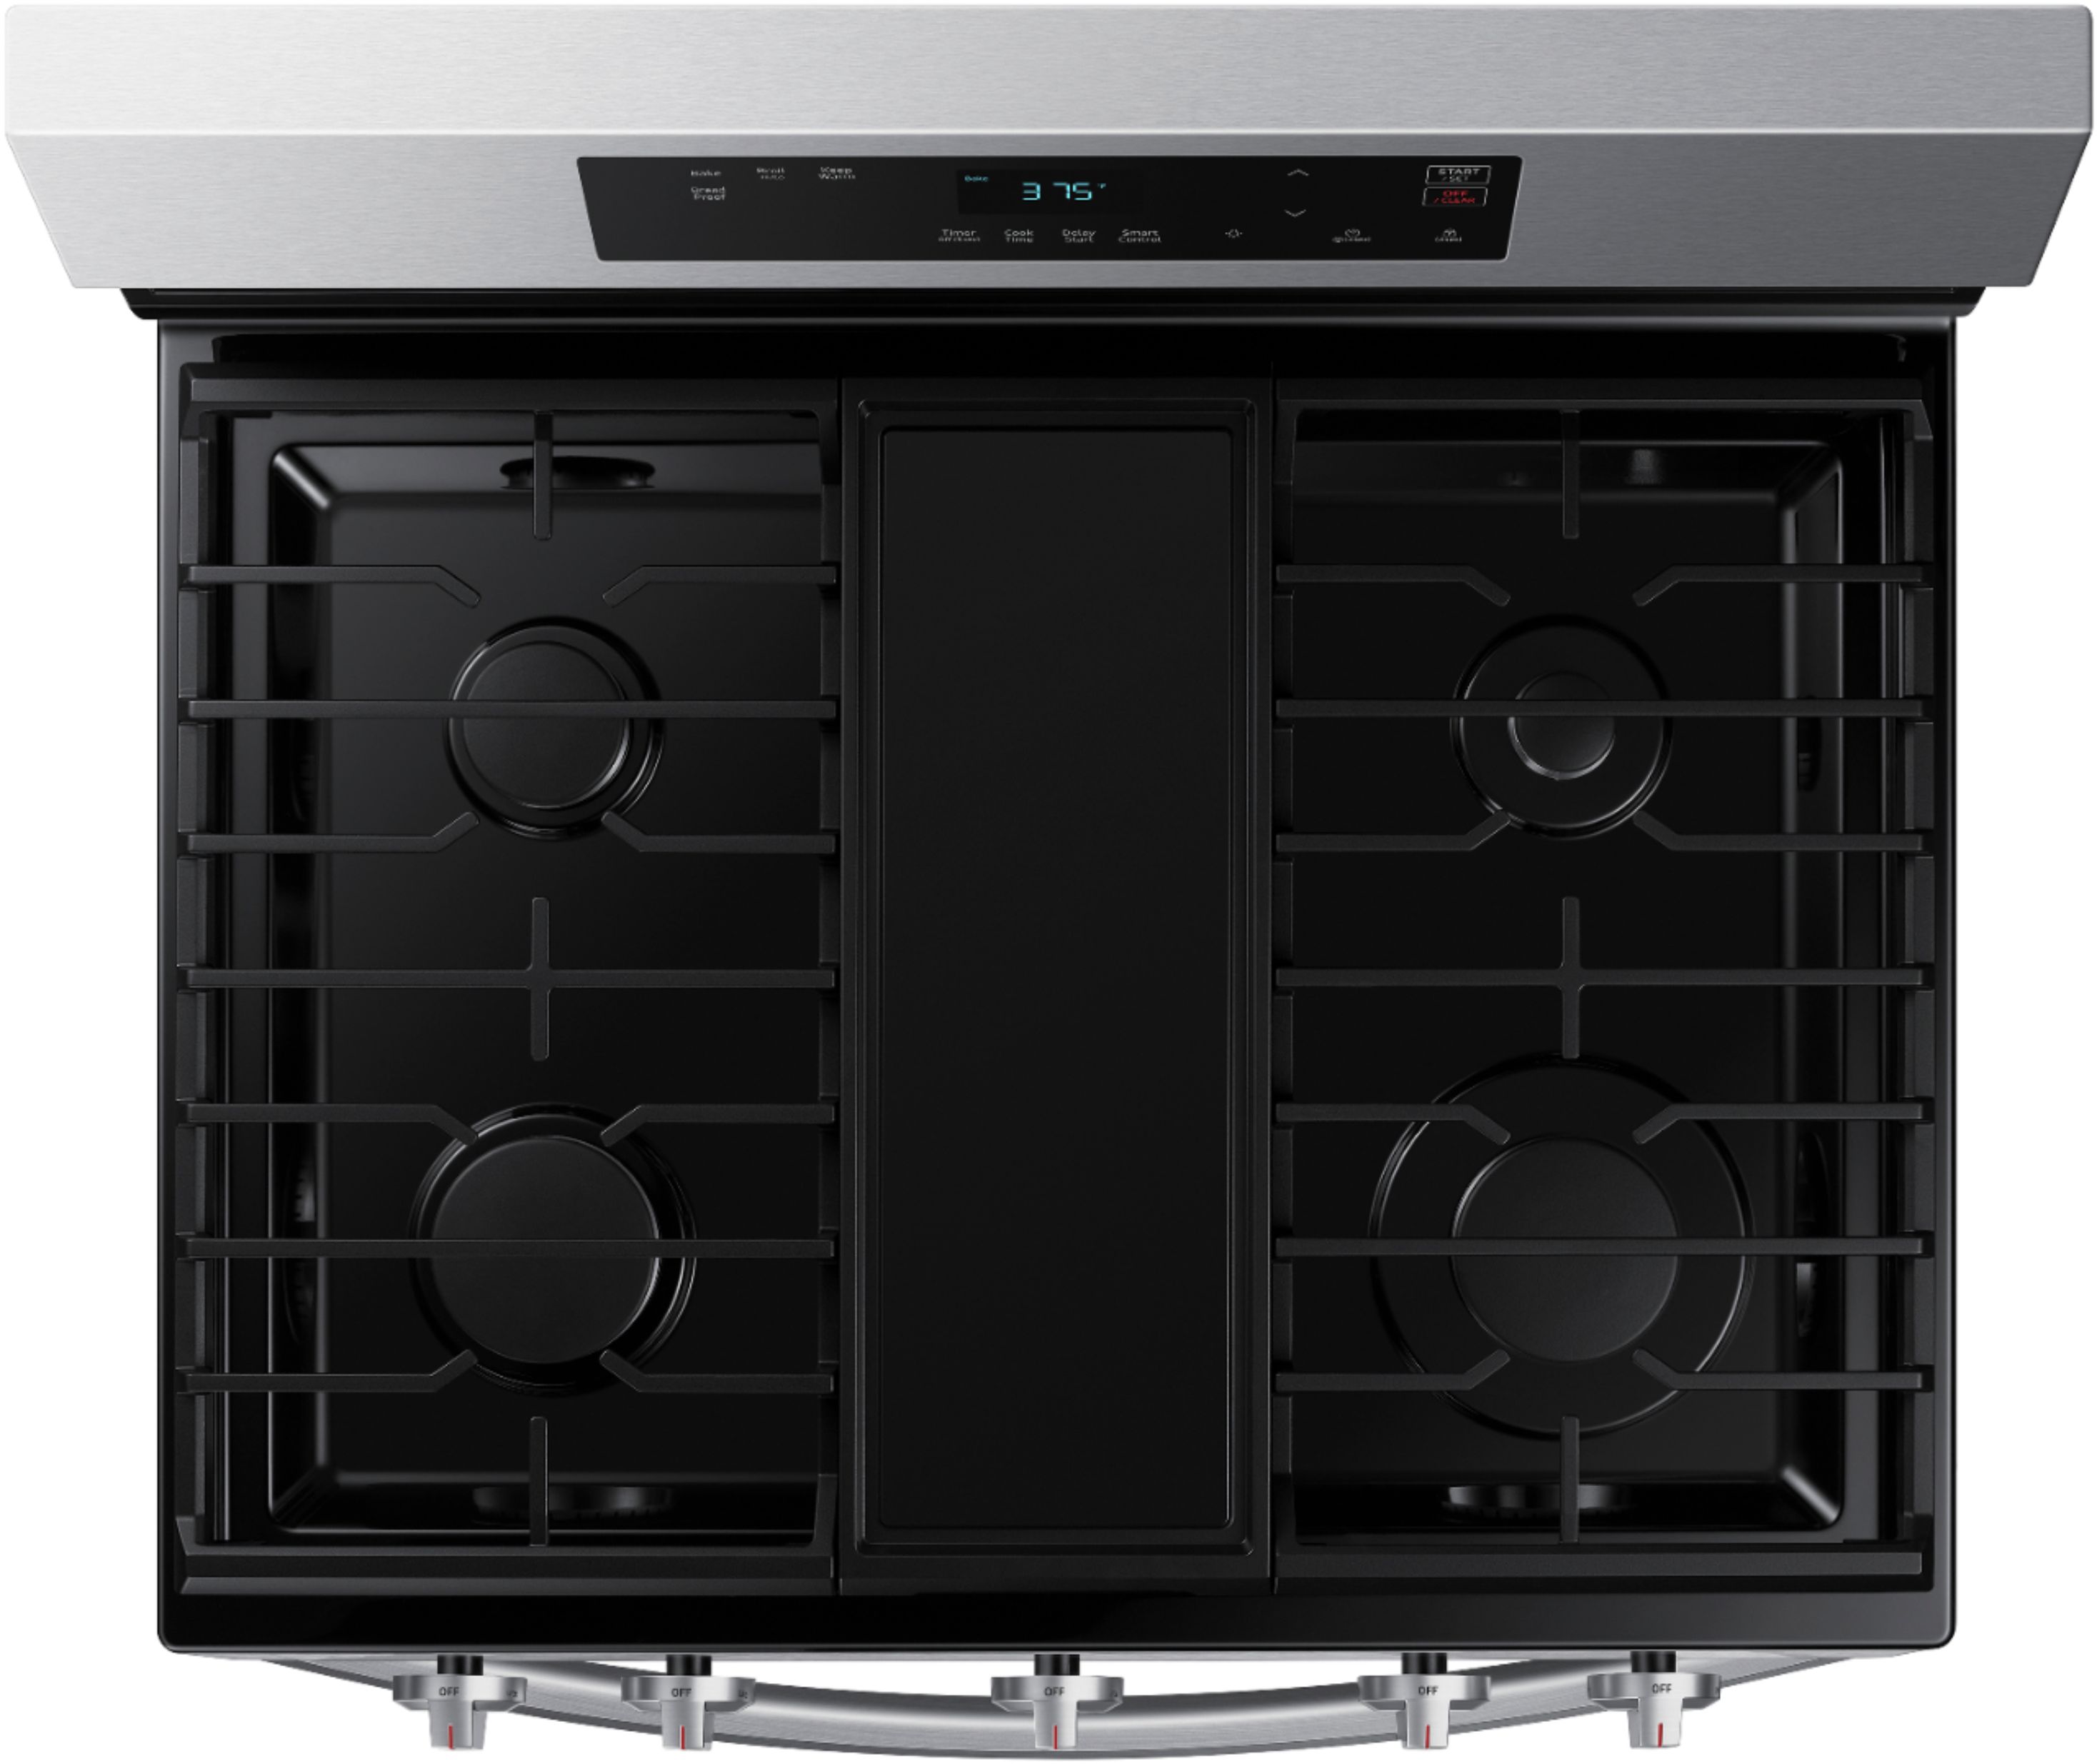 Samsung - 6.0 cu. ft. Freestanding Gas Range with WiFi and Integrated Griddle - Stainless Steel